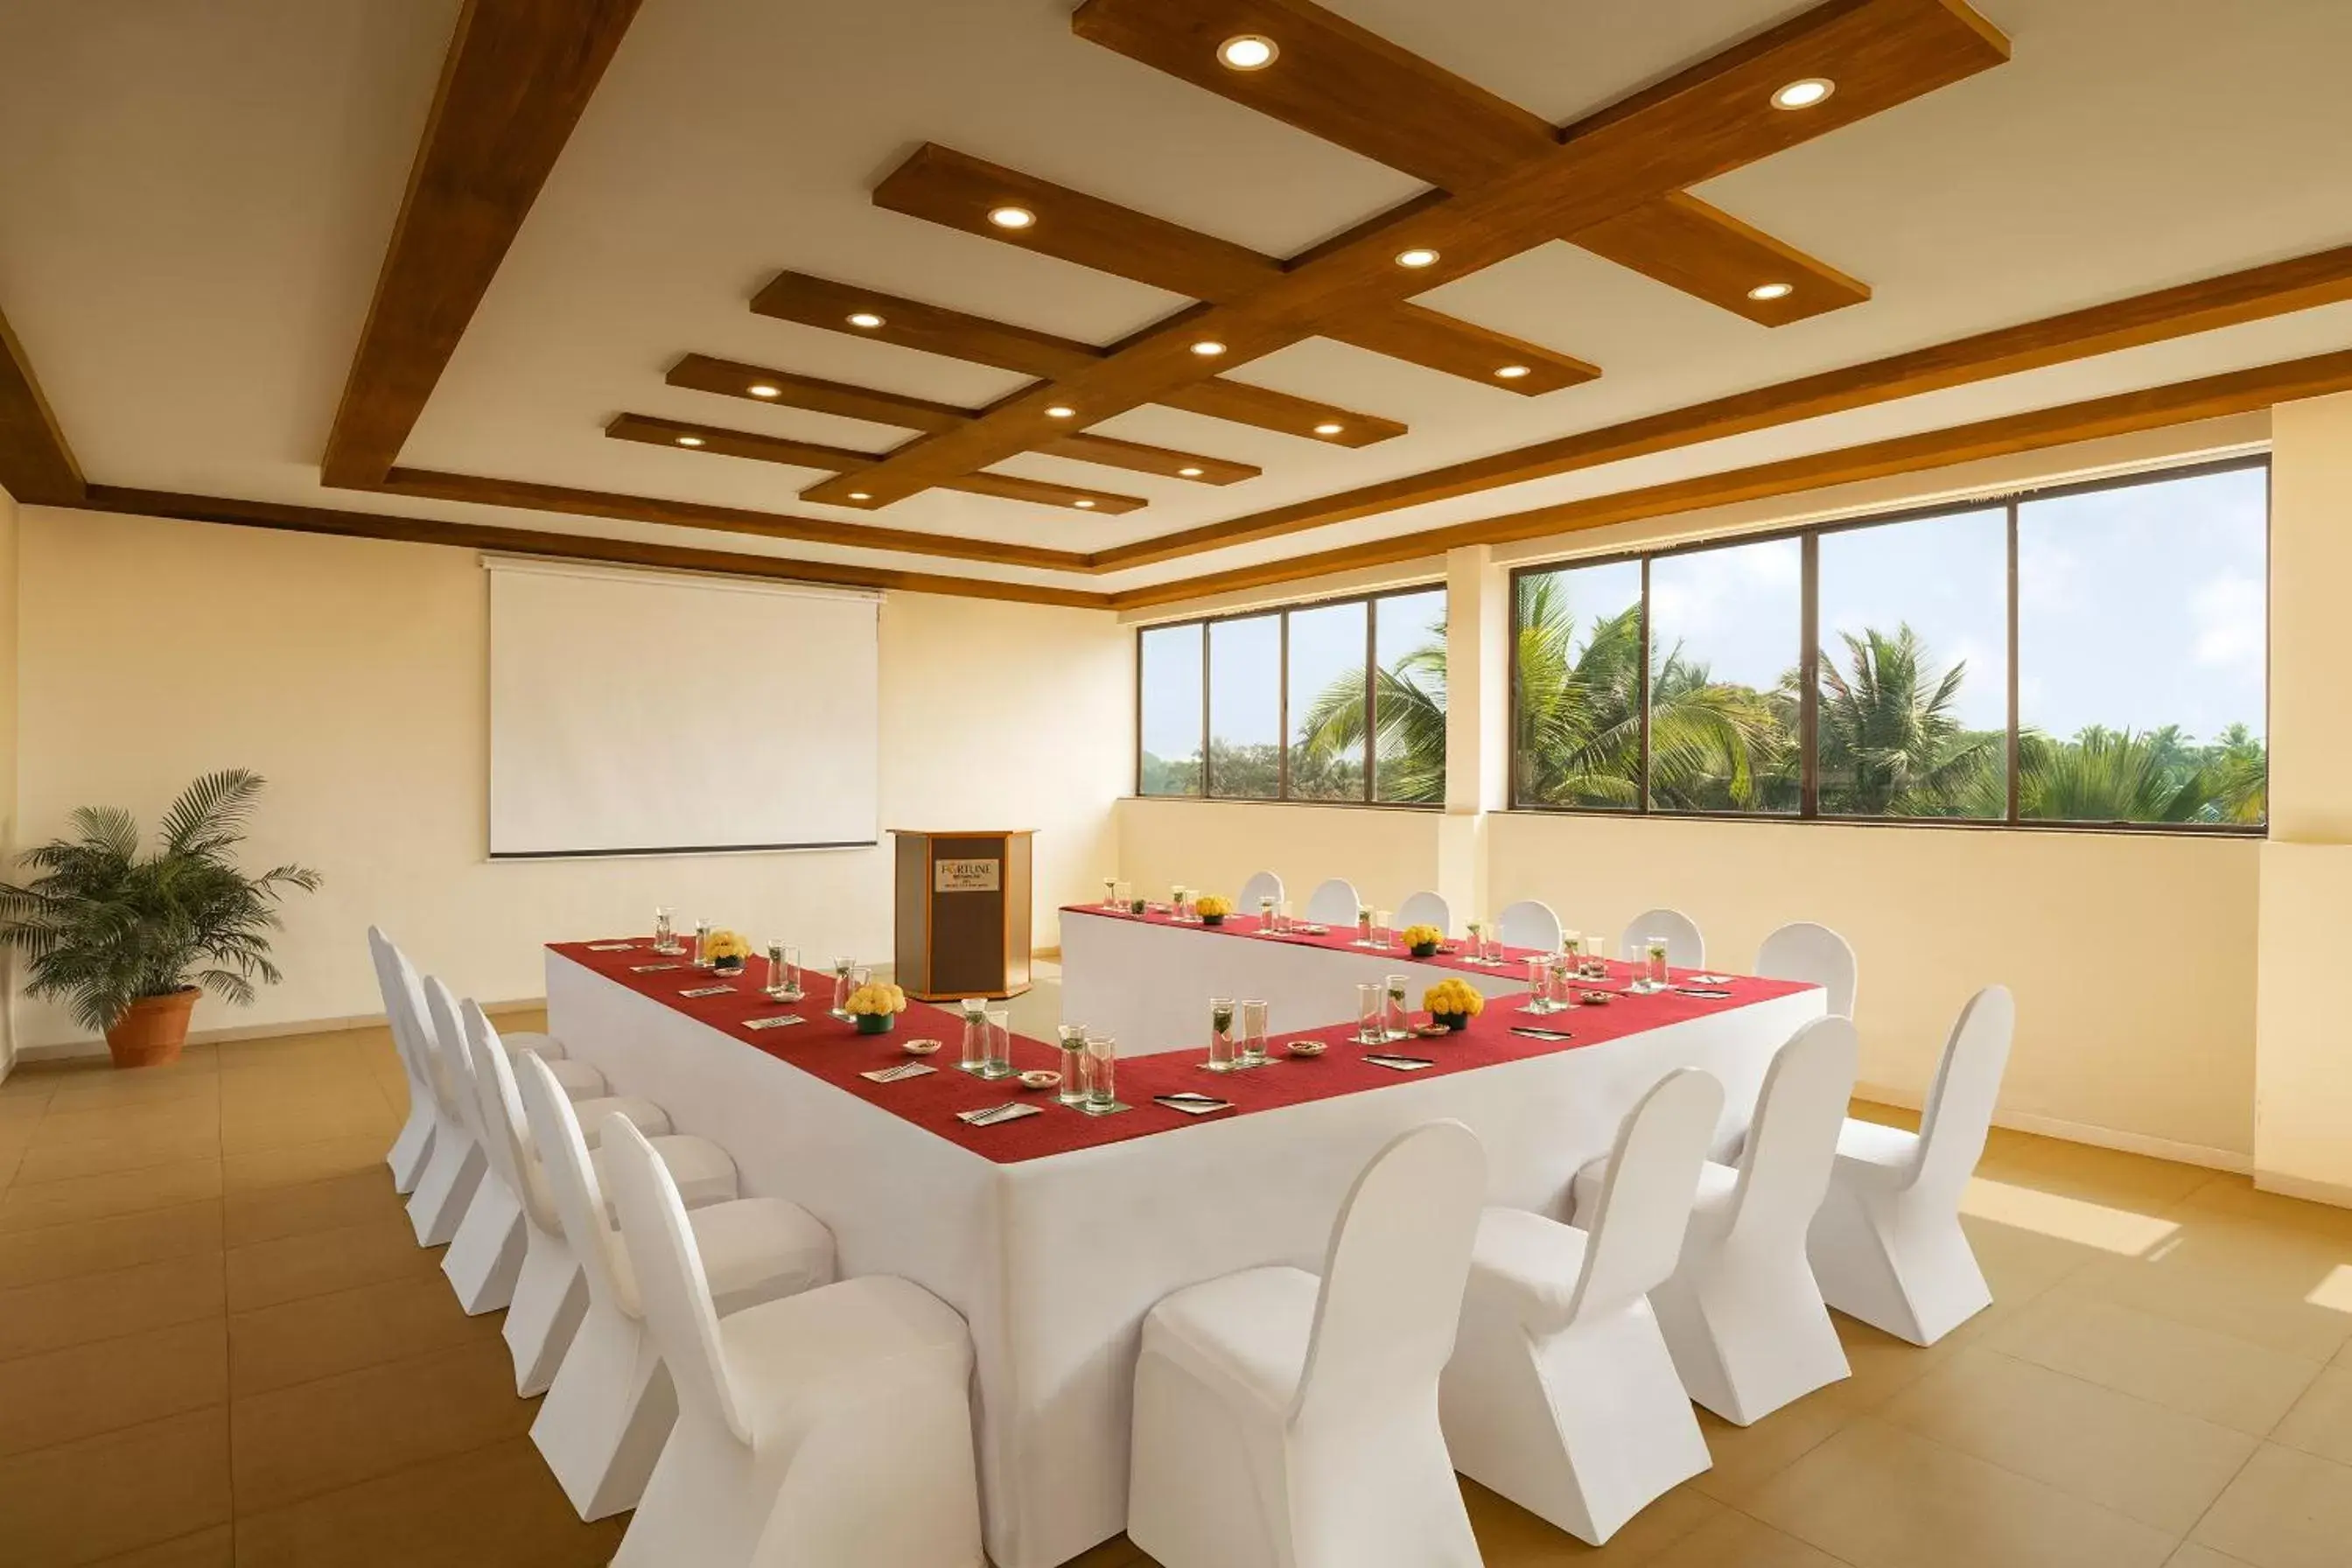 Meeting/conference room in Fortune Resort Benaulim, Goa - Member ITC's Hotel Group